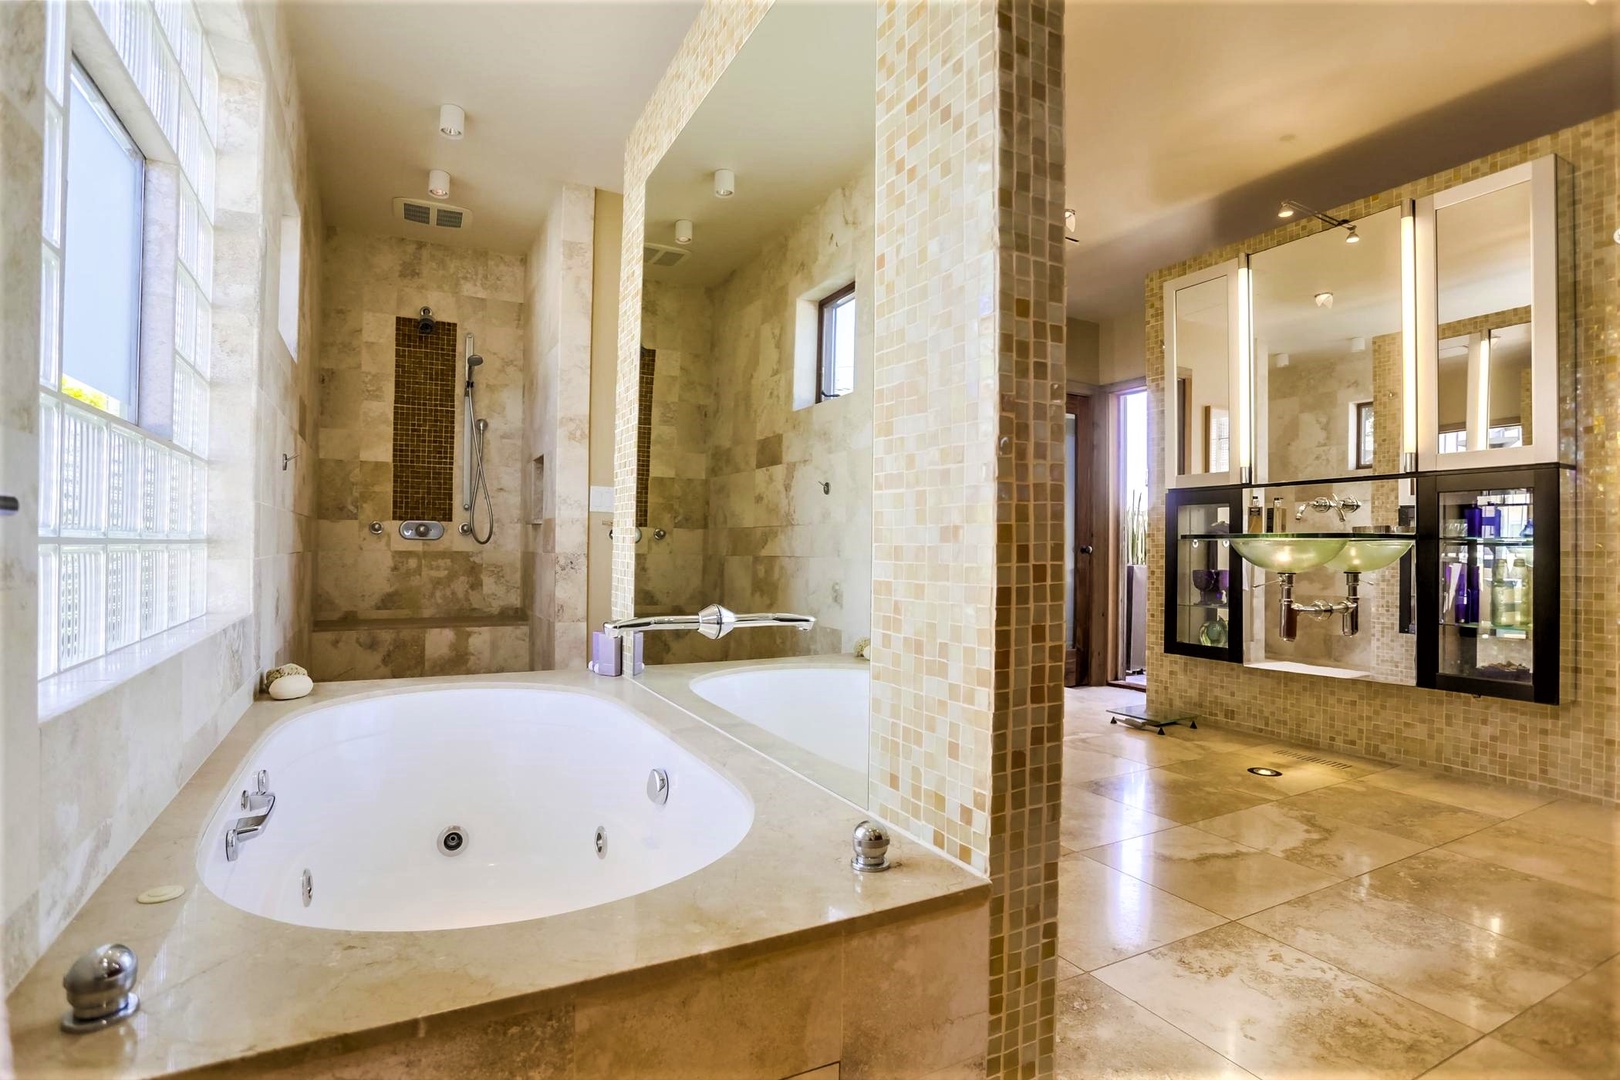 Sunken jetted tub and walk-in shower